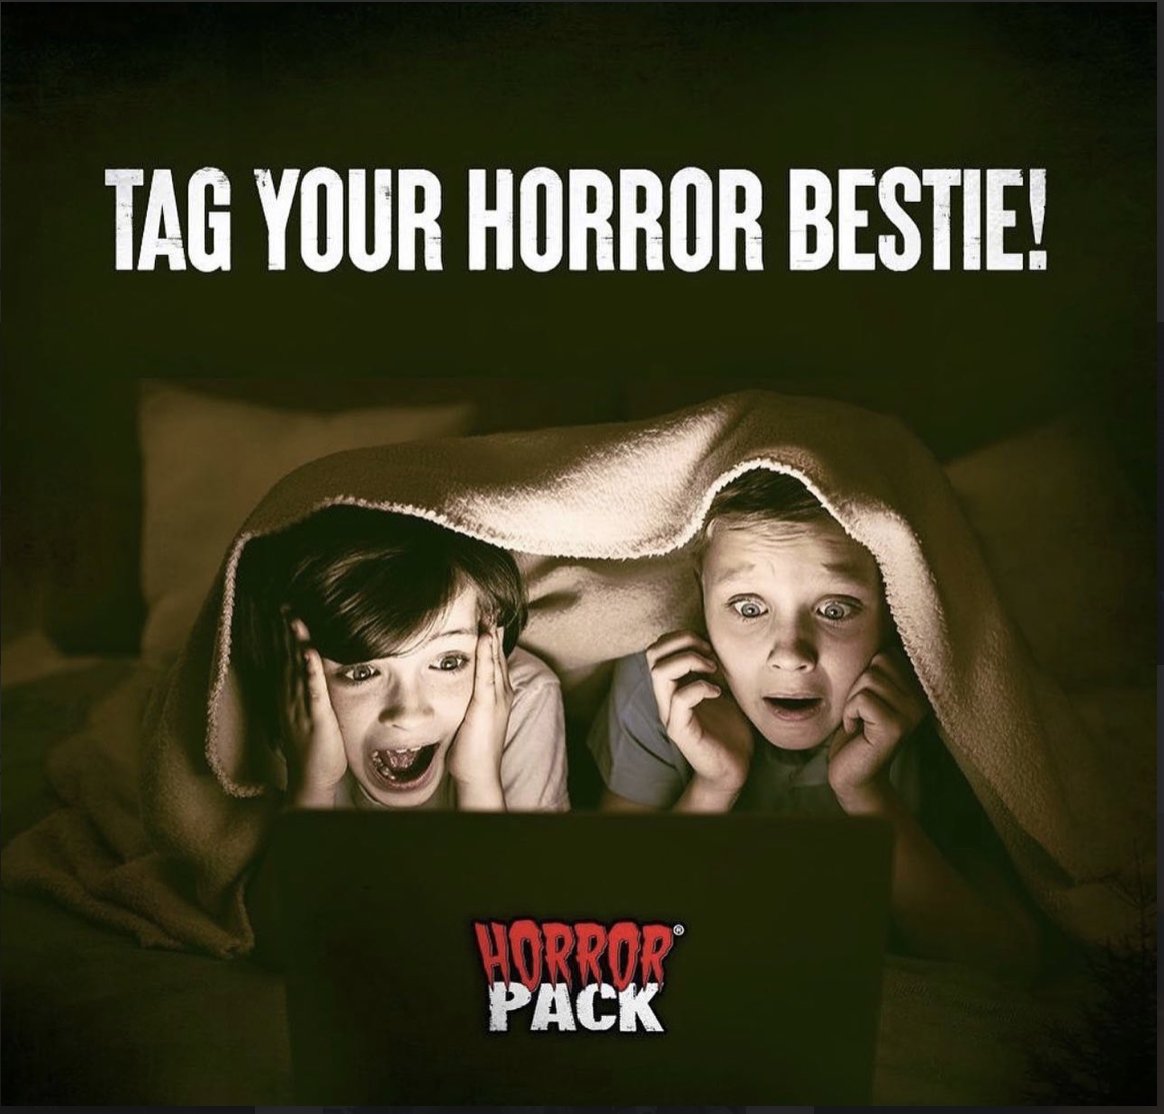 Tag your horror bestie!